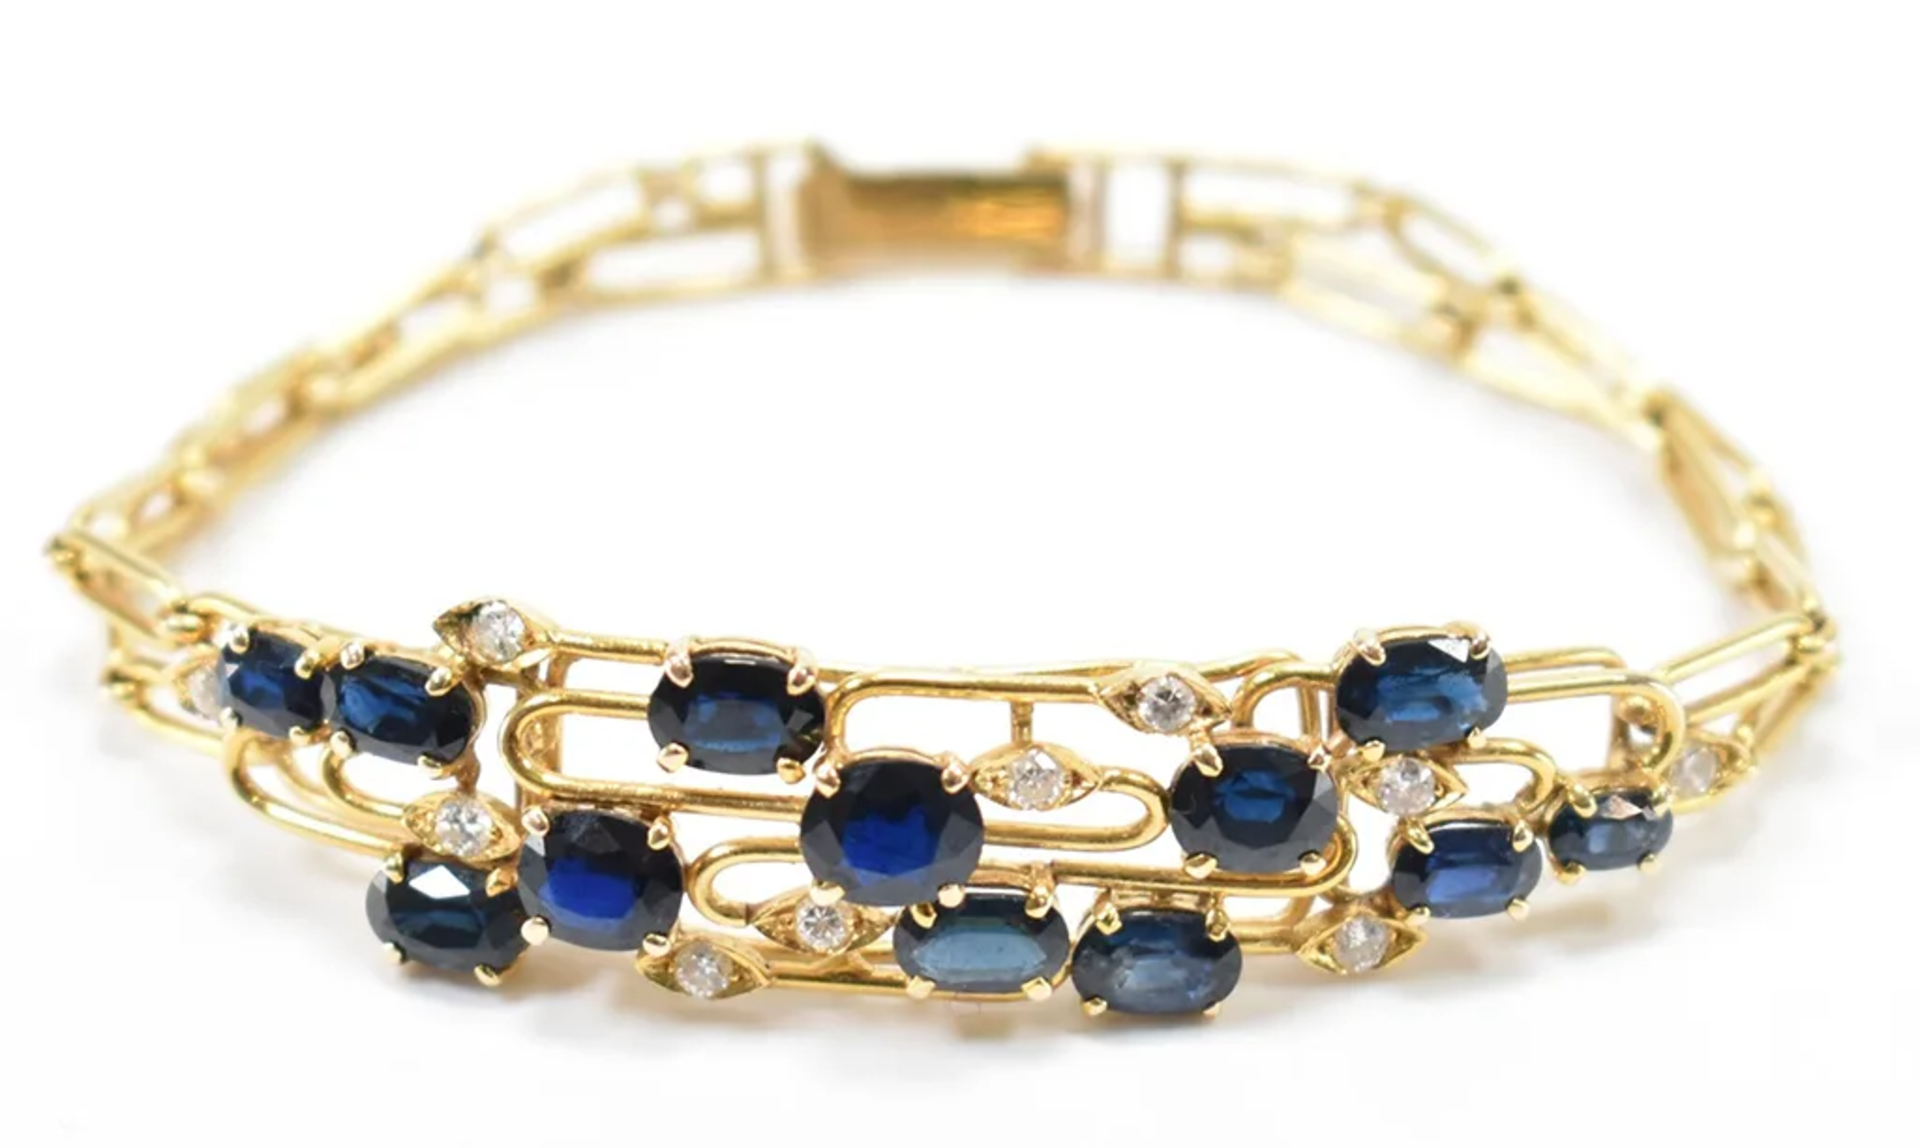 Bracelet with 12x blue Sapphires and Diamonds 14K Yellow Gold - Image 2 of 4